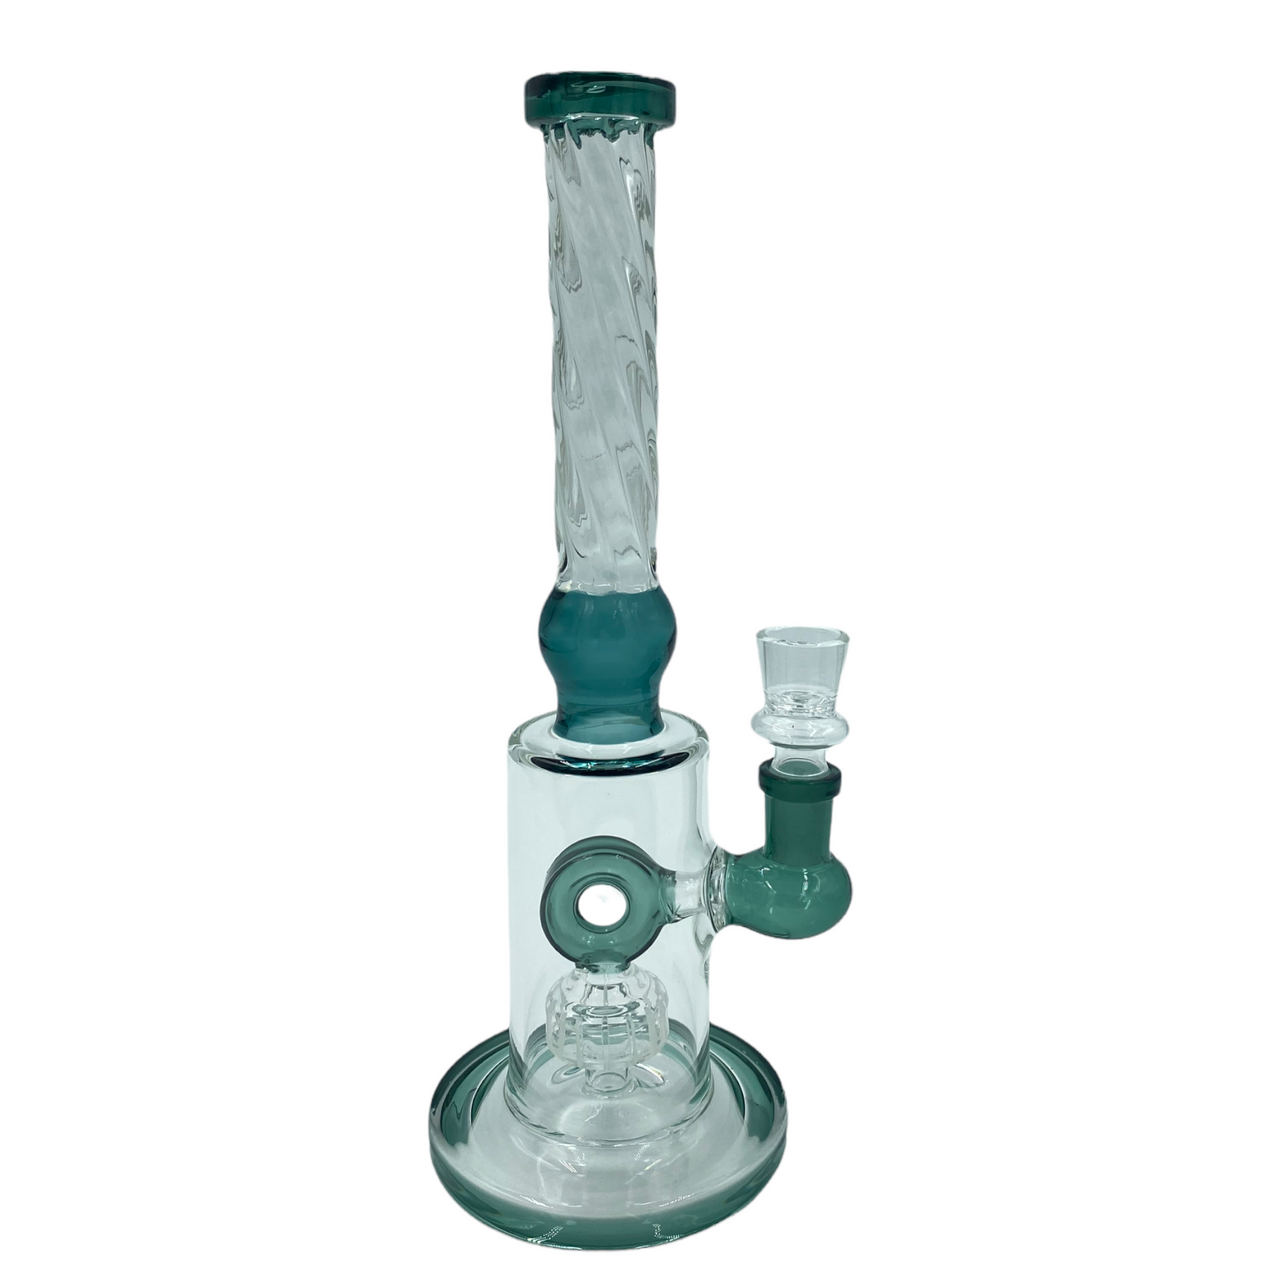 10" Donut/Showerhead Perc Swizel Neck Water Pipe/Bong - Assorted Colors - With 14mm Male Quartz Banger and Flower Bowl